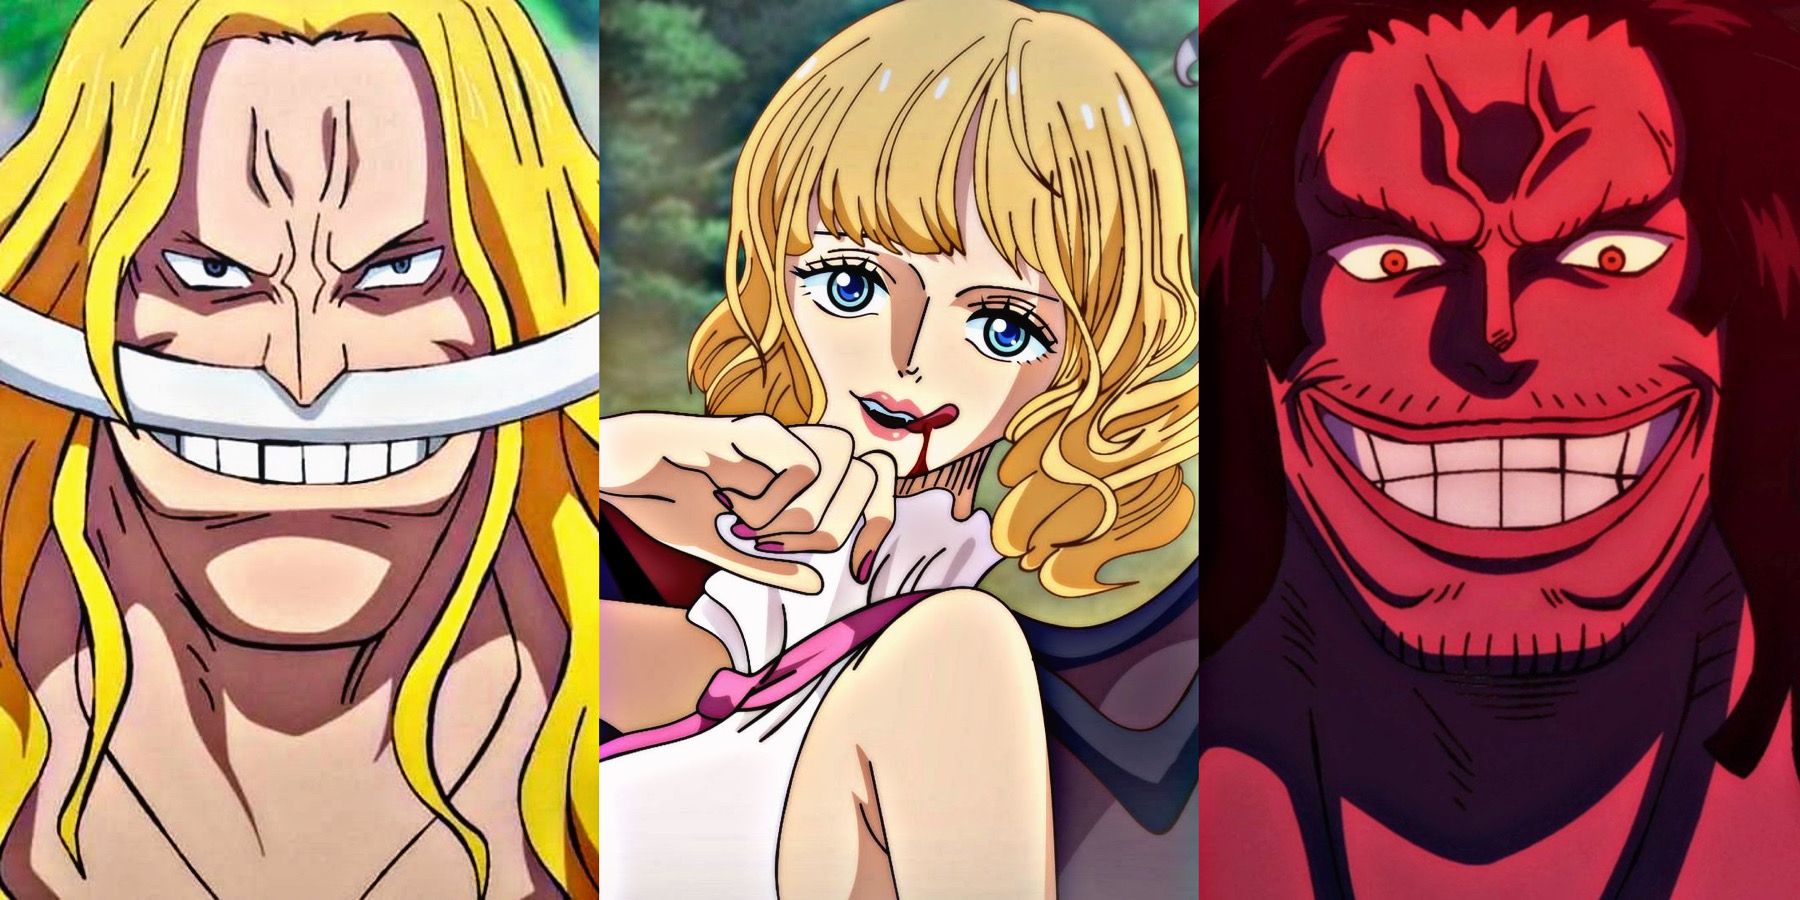 10 Strongest Characters In The God Valley Incident in One Piece